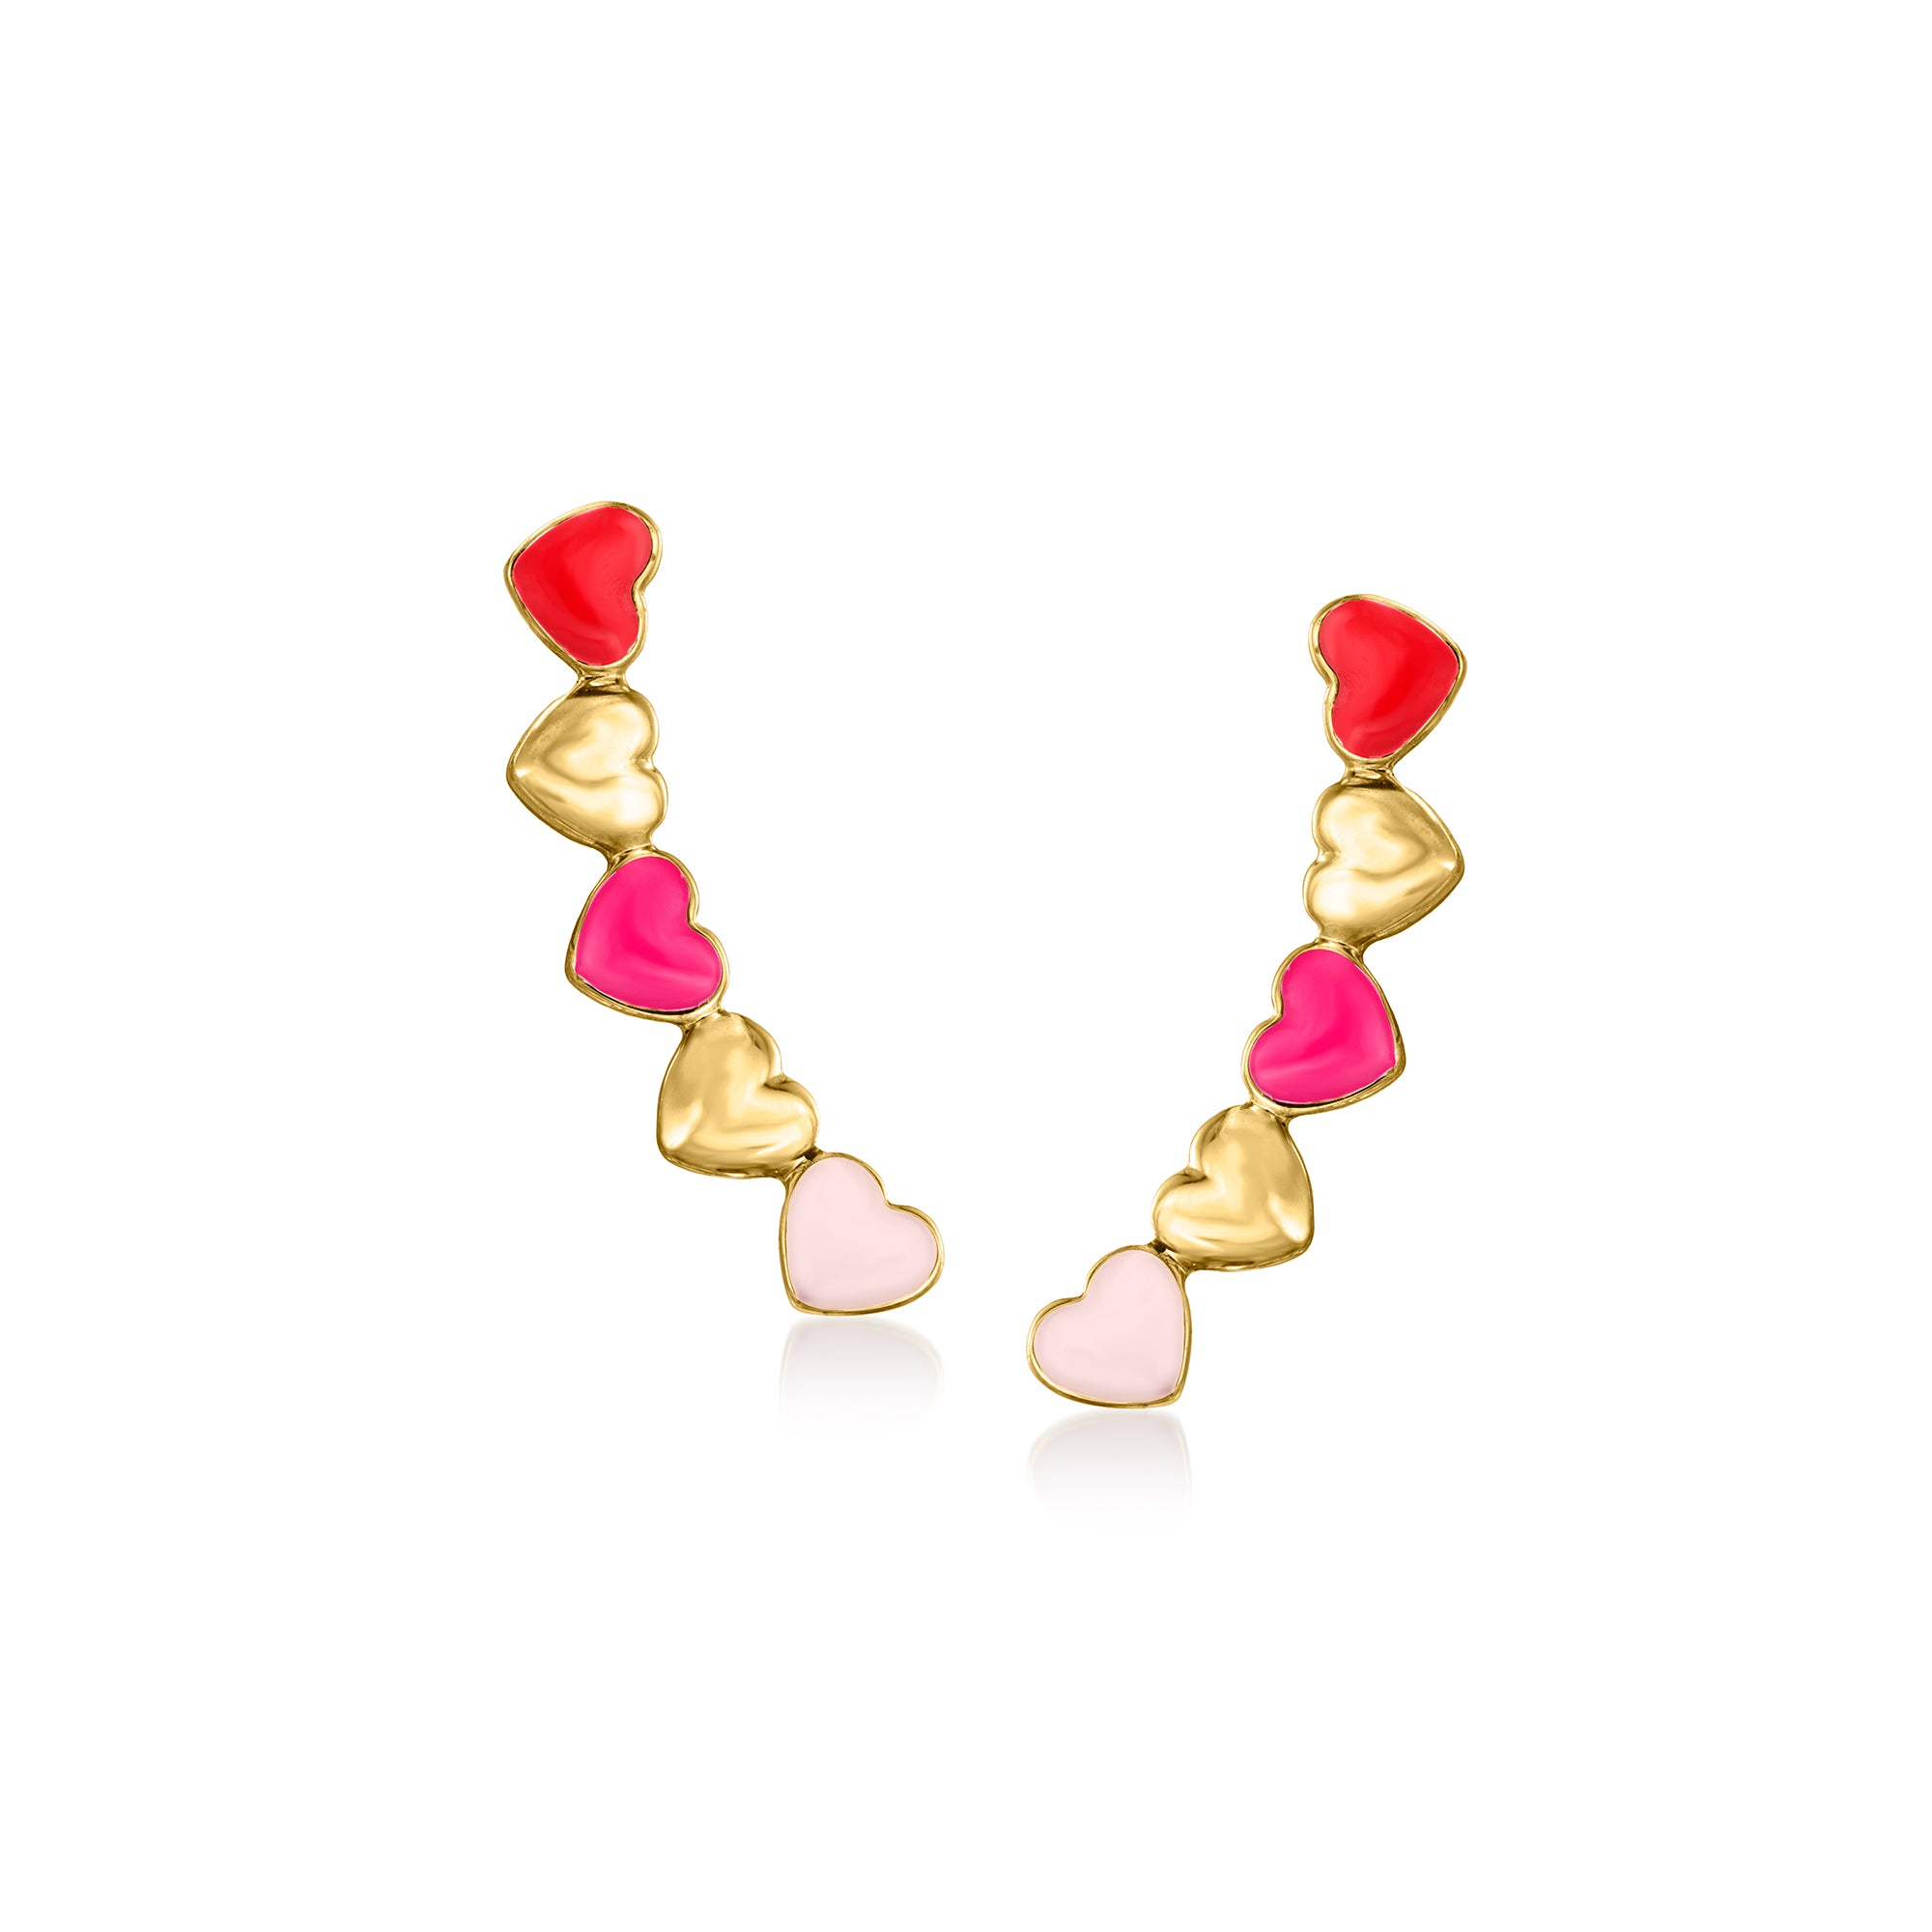 RS Pure by Ross-Simons Multicolored Enamel Heart Ear Climbers in 14kt Yellow Gold female